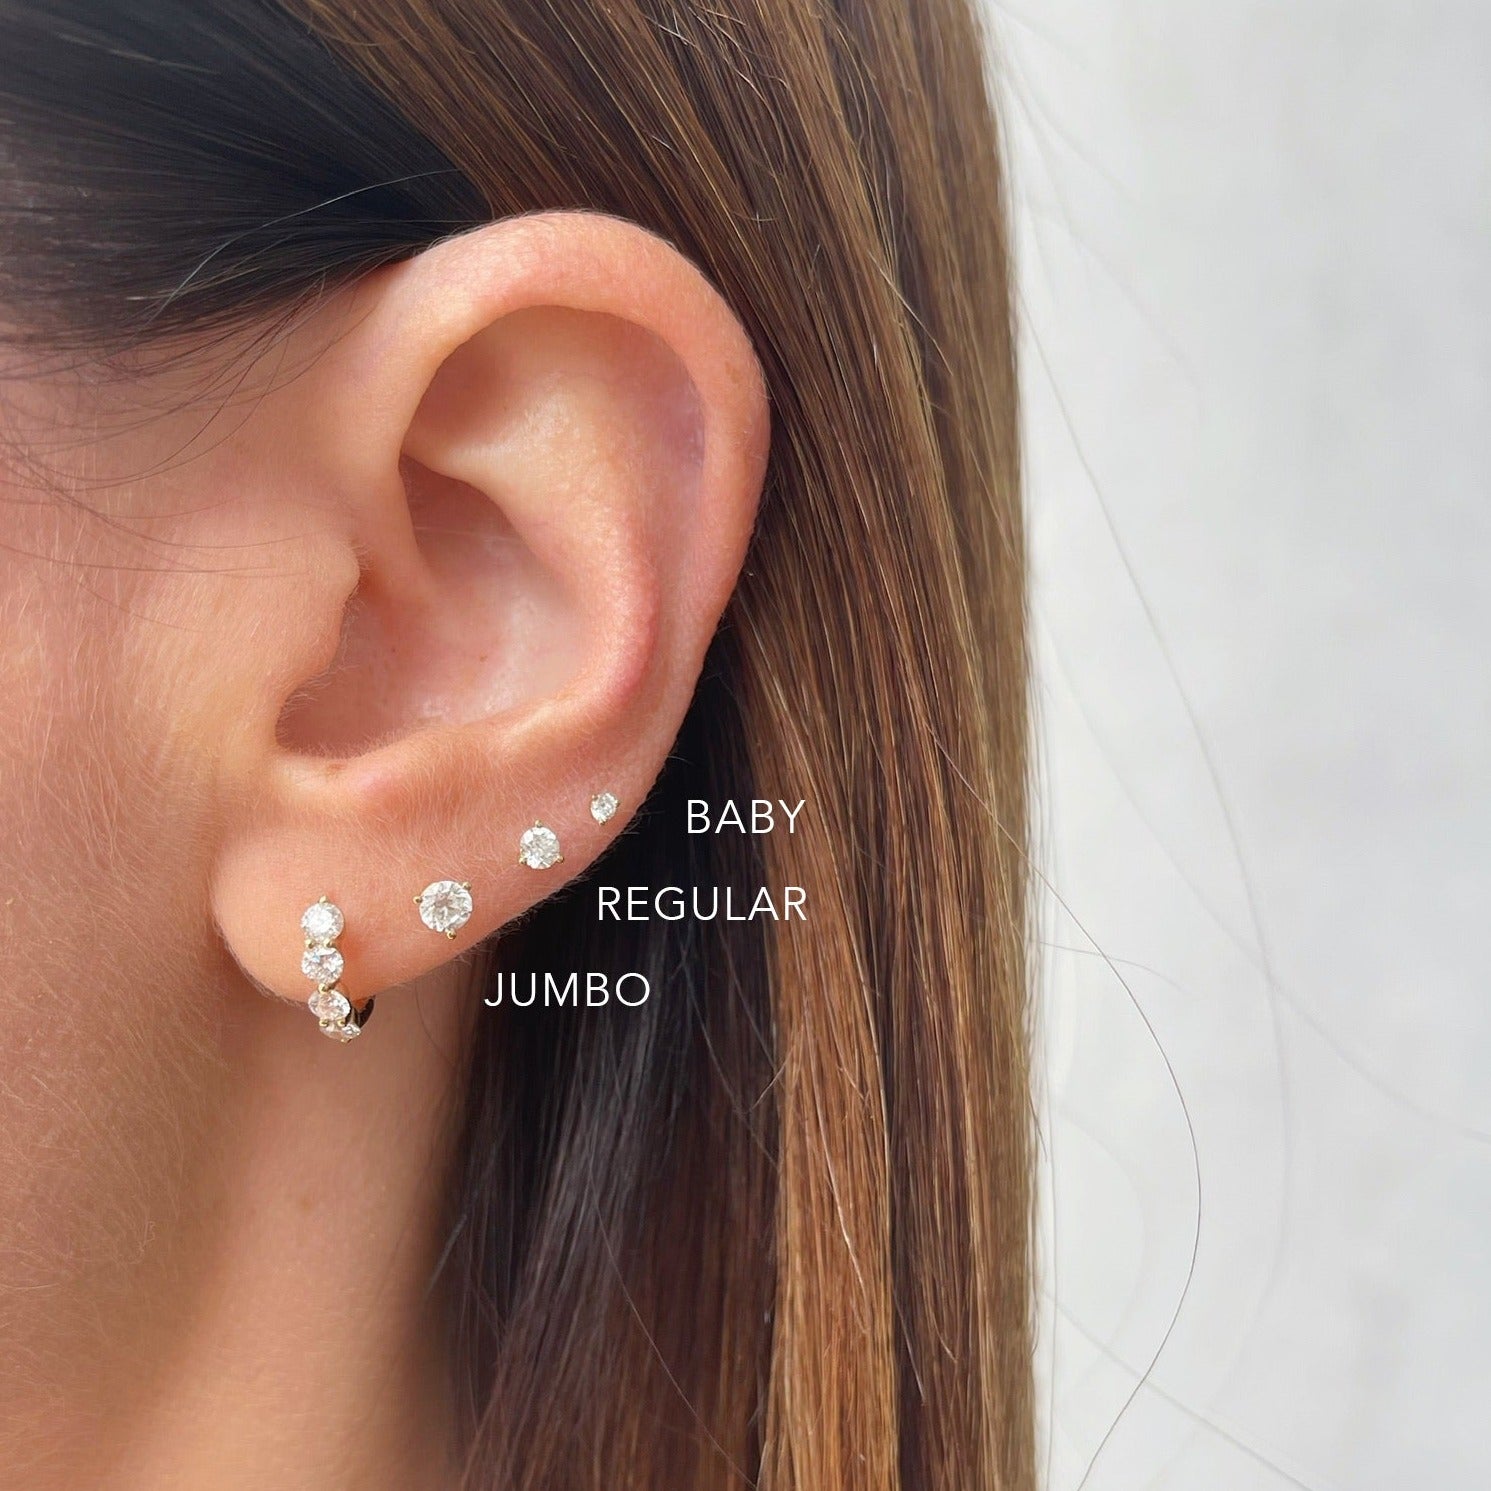 Baby Solitaire Diamond Stud Earring in 14k yellow gold styled on fourth earring hole of earlobe of model with brown hair